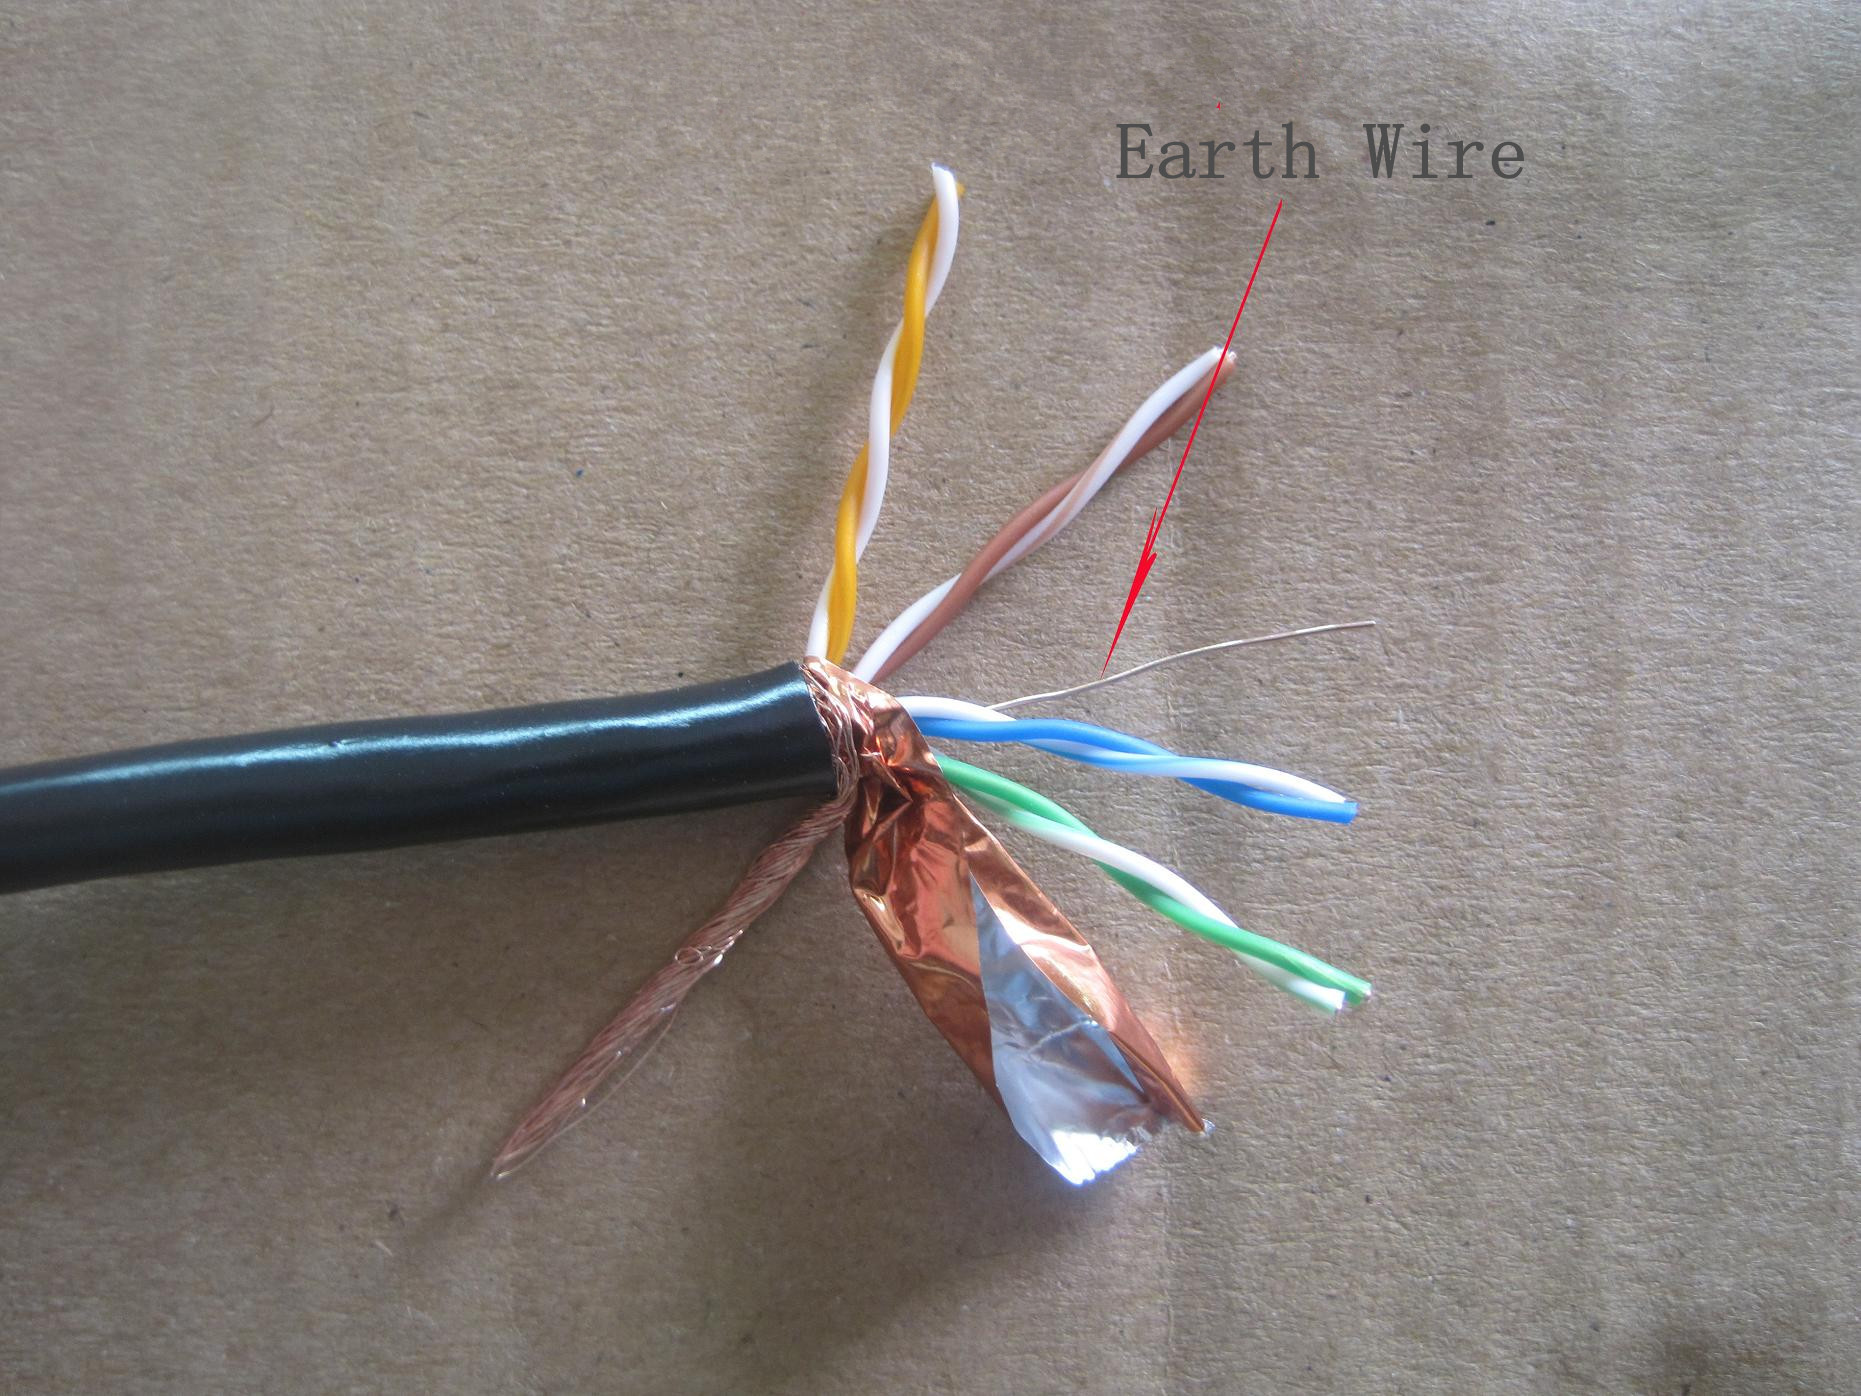 Cat5e STP Cable AL-FOIL Shielded Layer CCA Braiding Solid Copper Conductor 24AWG Twisted Pair Cables